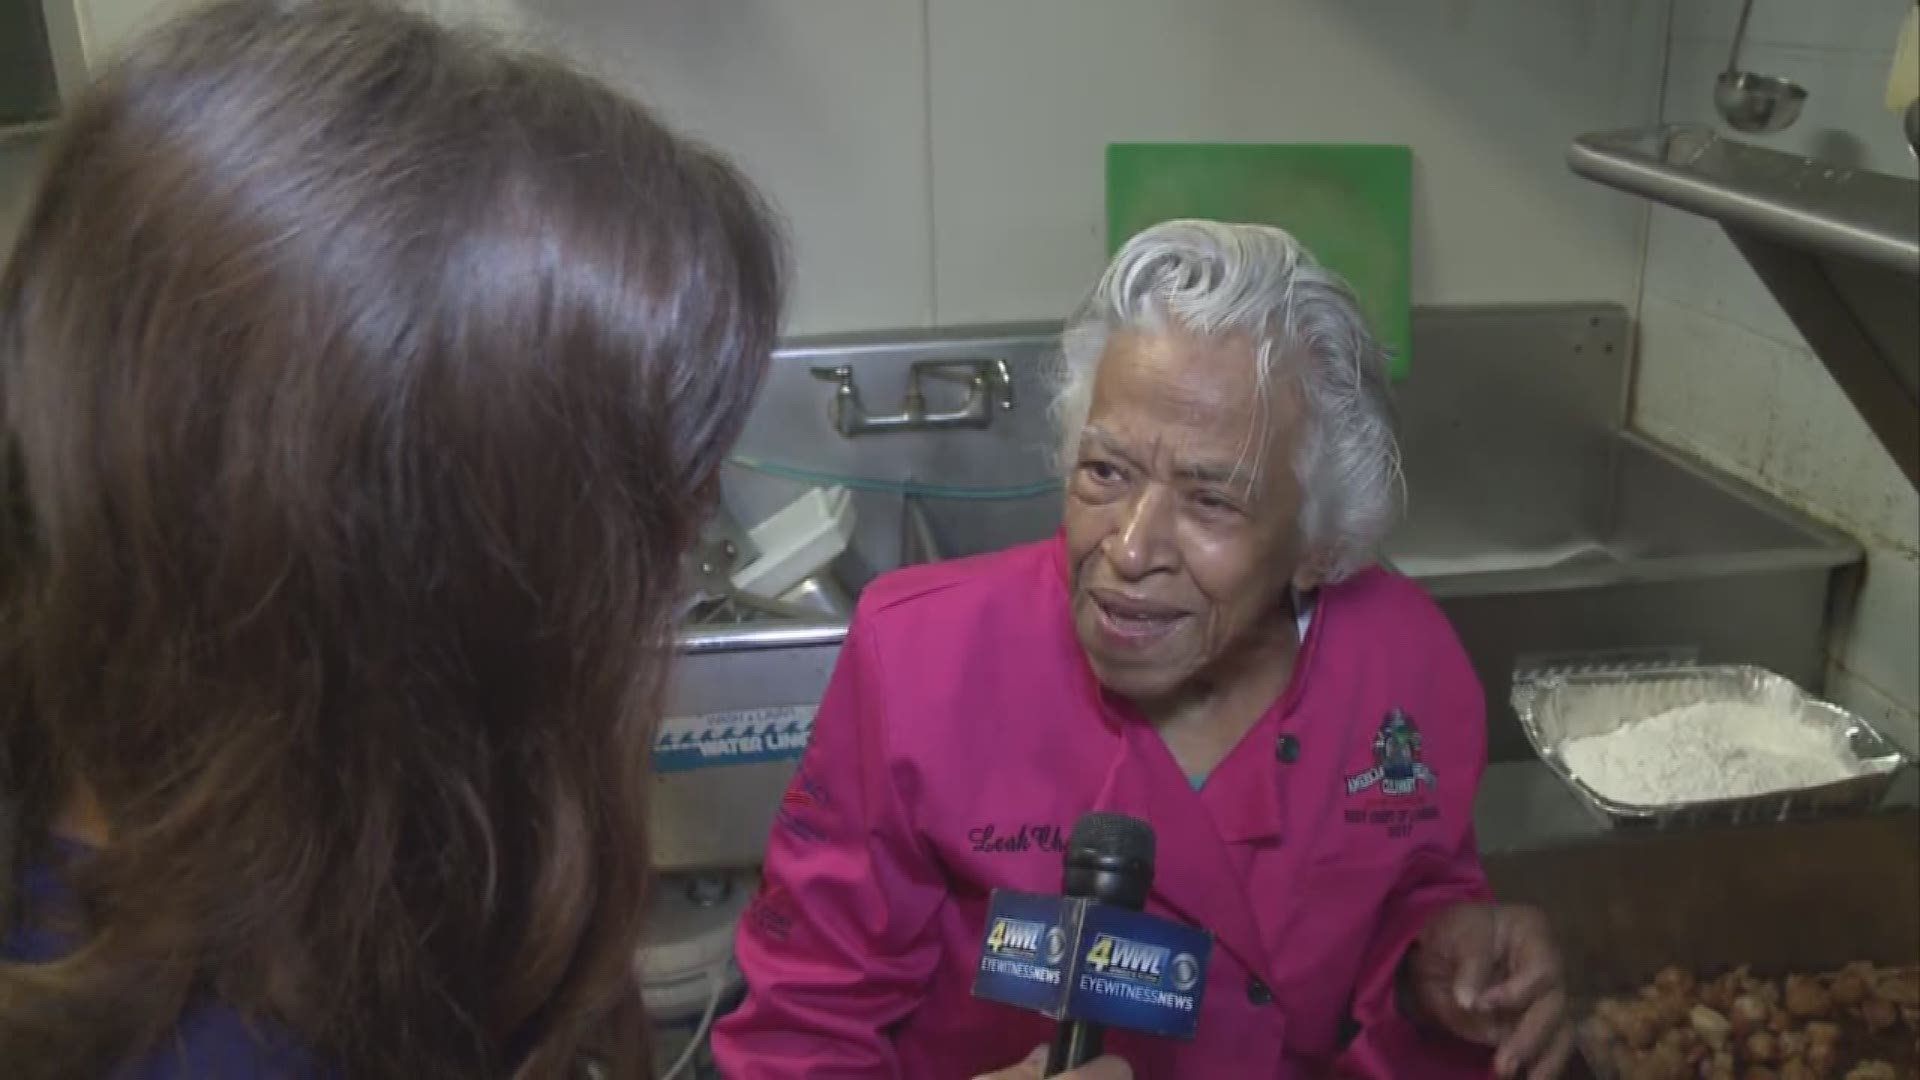 It is Holy Thursday and for the landmark restaurant Dooky Chase that means just one thing, Chef Leah Chase is making her gumbo Z'Herbes. Katie Stiener talks to her about the delicious tradition.